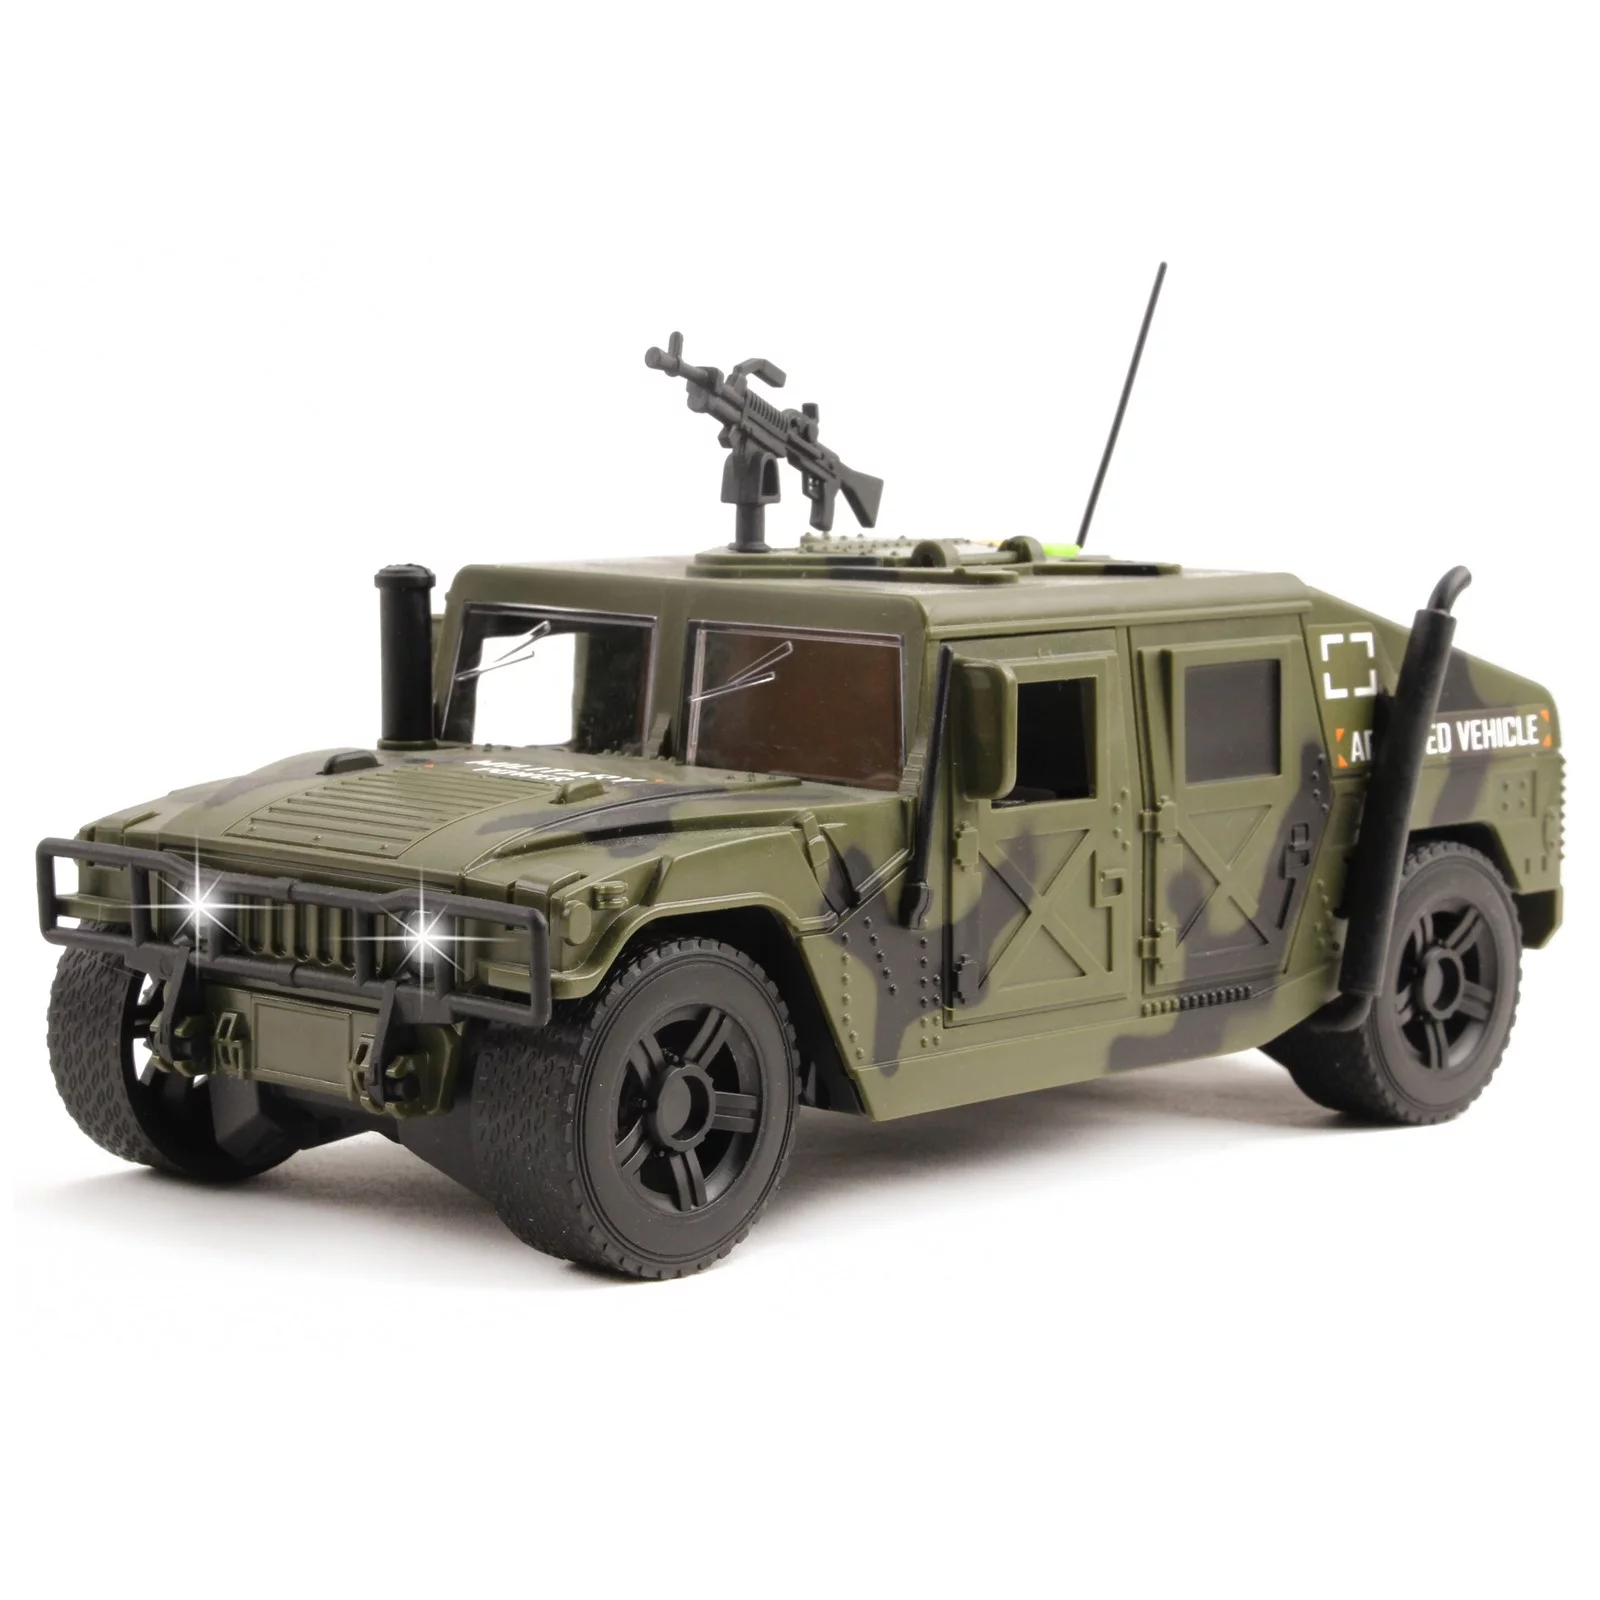 Vokodo Military Humvee Truck Friction Powered With Lights And Sounds Kids Push And Go 1:16 Scale Pretend Play Armored Army Vehicle